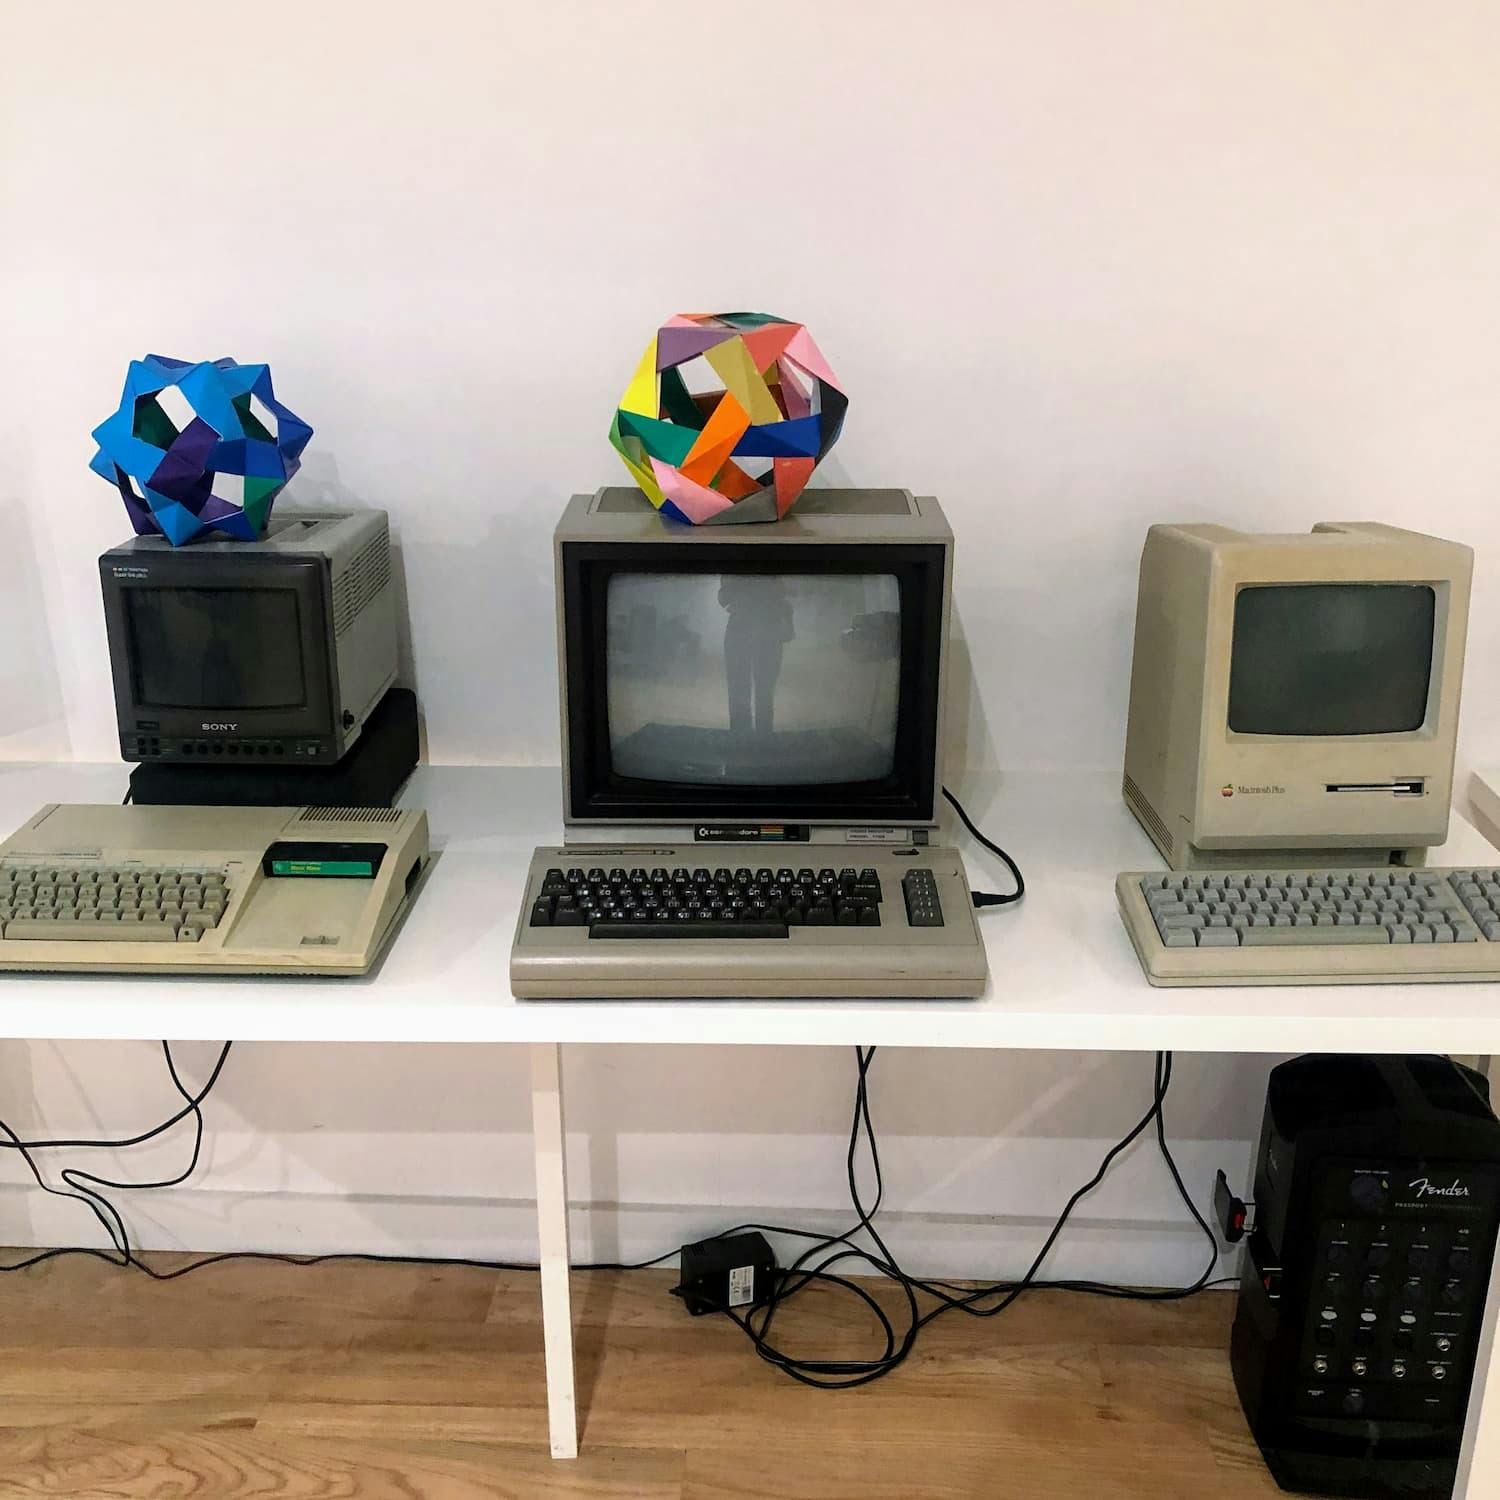 A few of the amazing (and functional!) vintage computers at the Recurse Center (April '19)